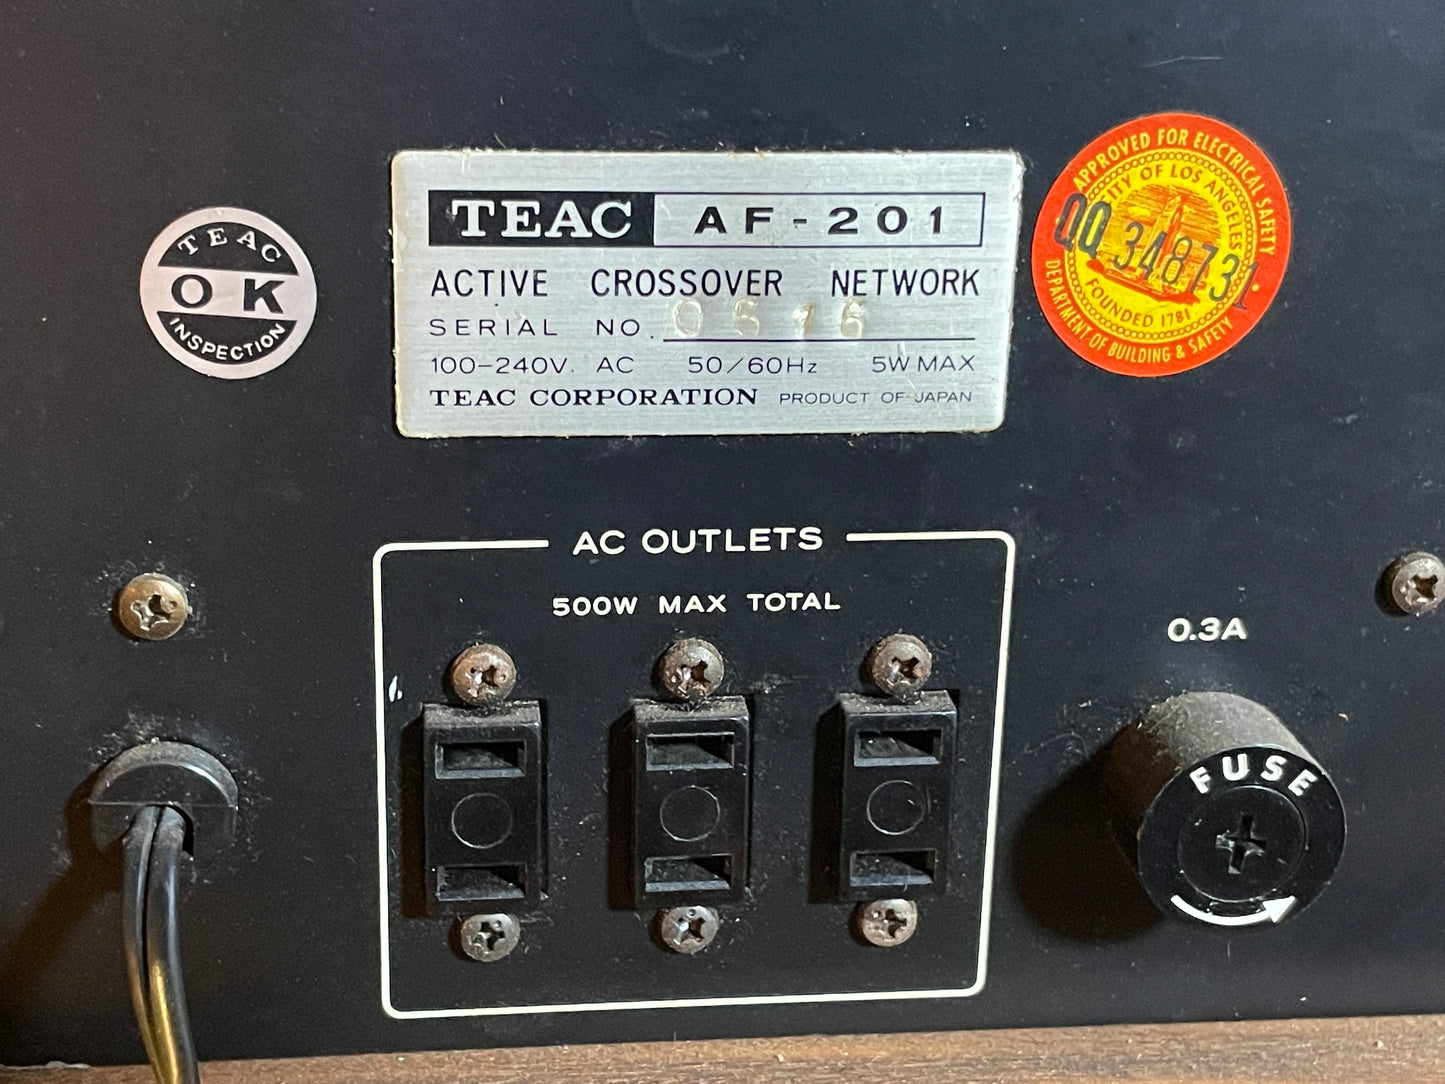 TEAC Consort Series AF-201 Multi-Channel Filter Unit 3-Way / 2-Way Crossover